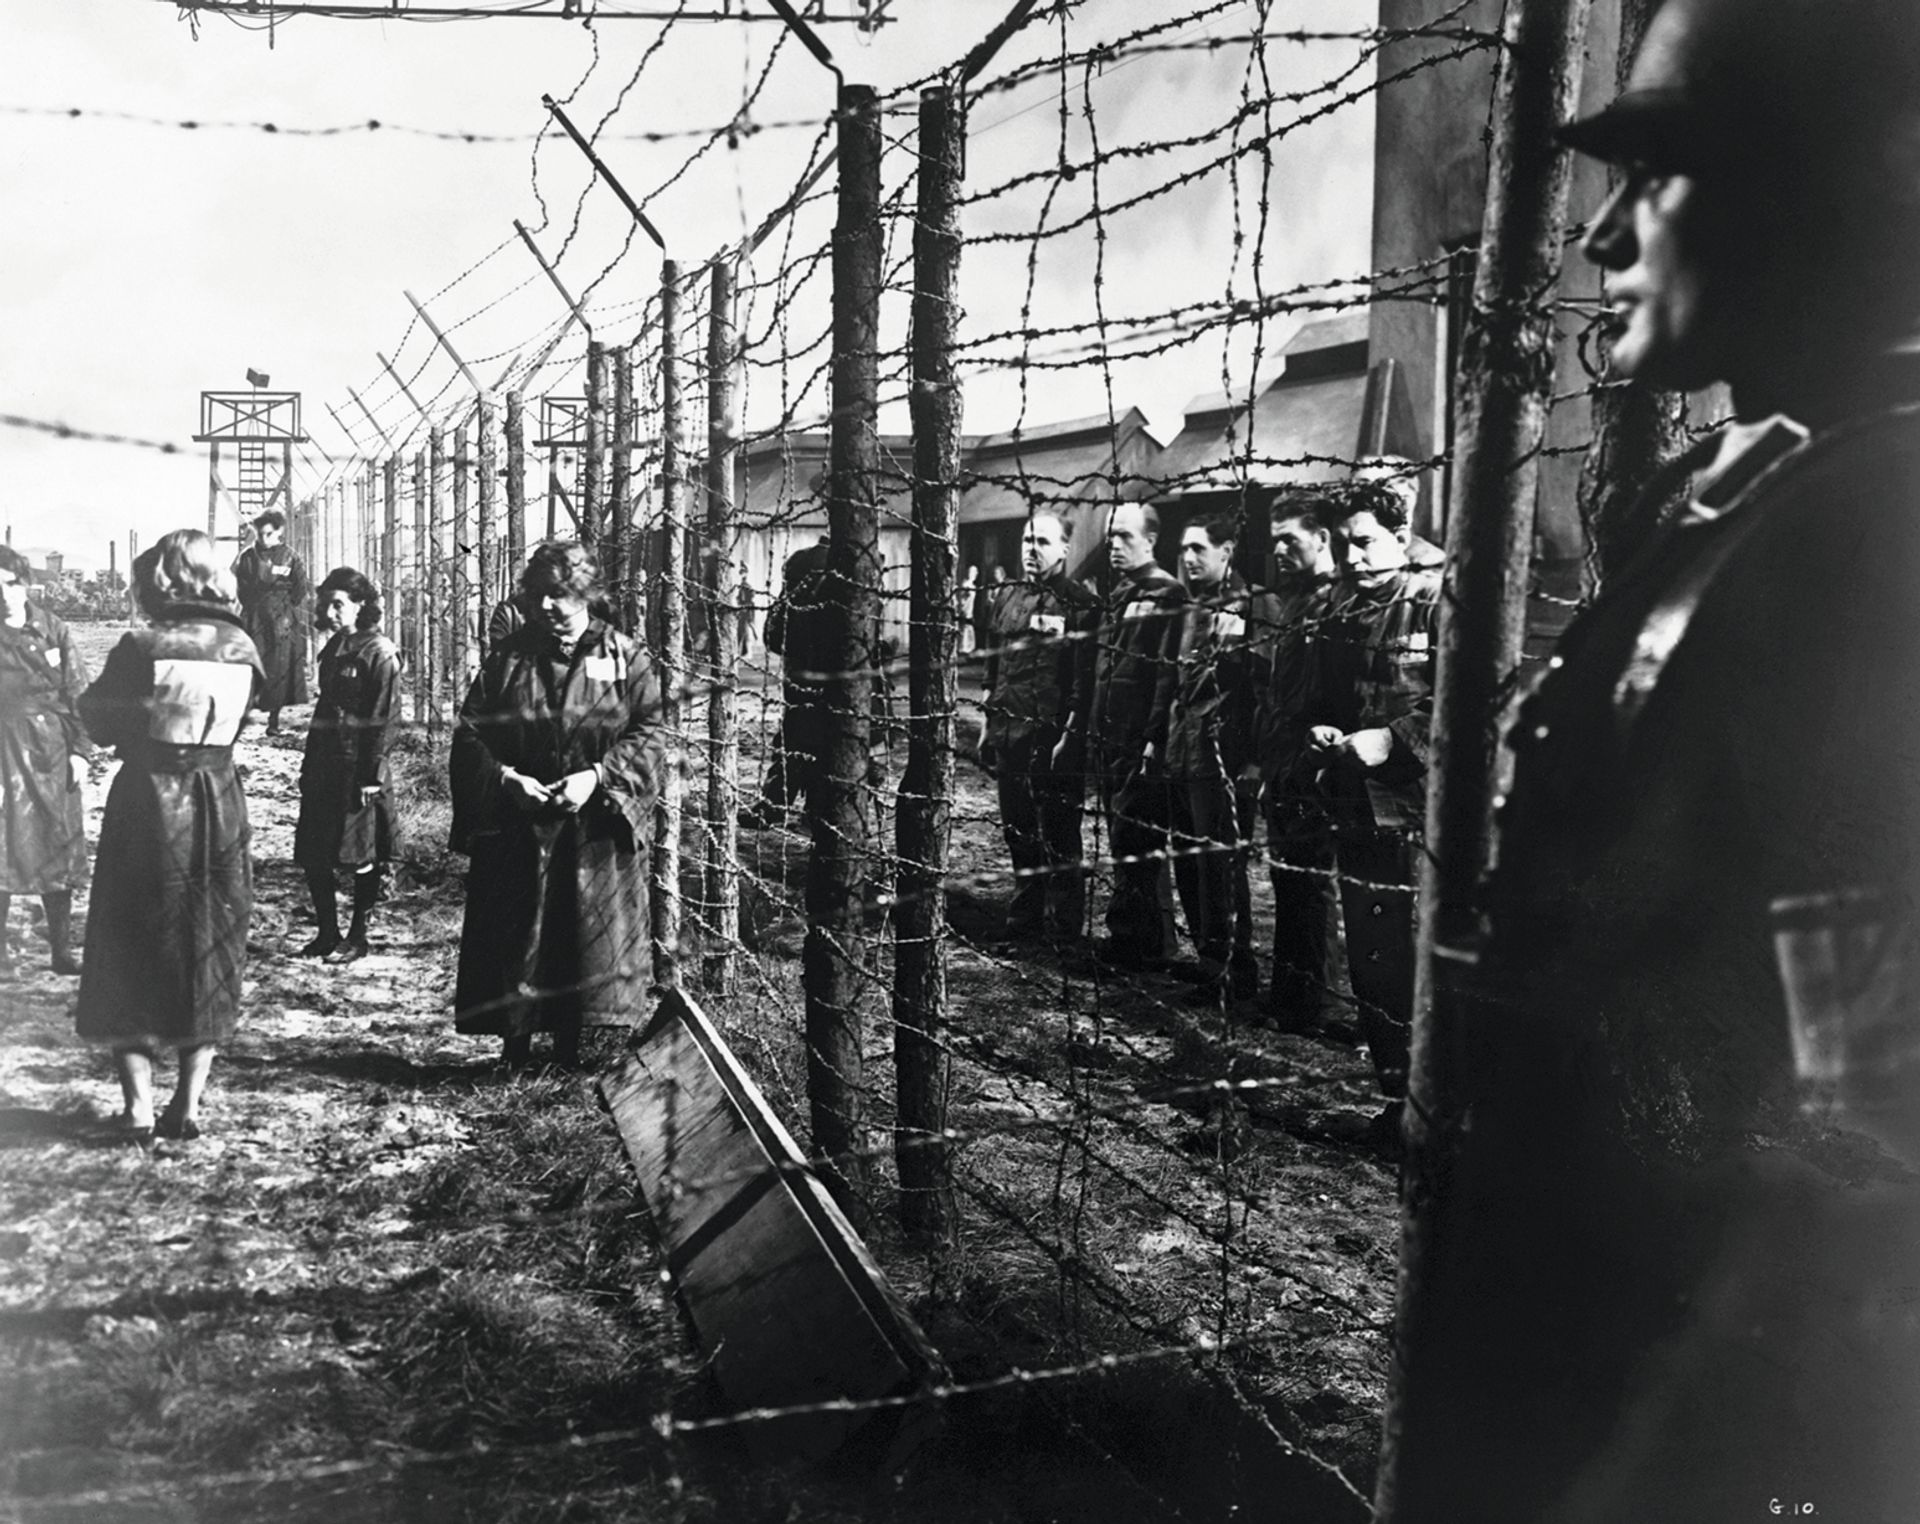 An electrified barbed-wire fence separates male and female prisoners at a German concentration camp. A Nazi guard keeps watch in the foreground. The inmates appear to be in relatively good health at this point in their internment, indicating they may have arrived recently at the camp © Hulton-Deutsch Collection/CORBIS/Corbis via Getty Images)